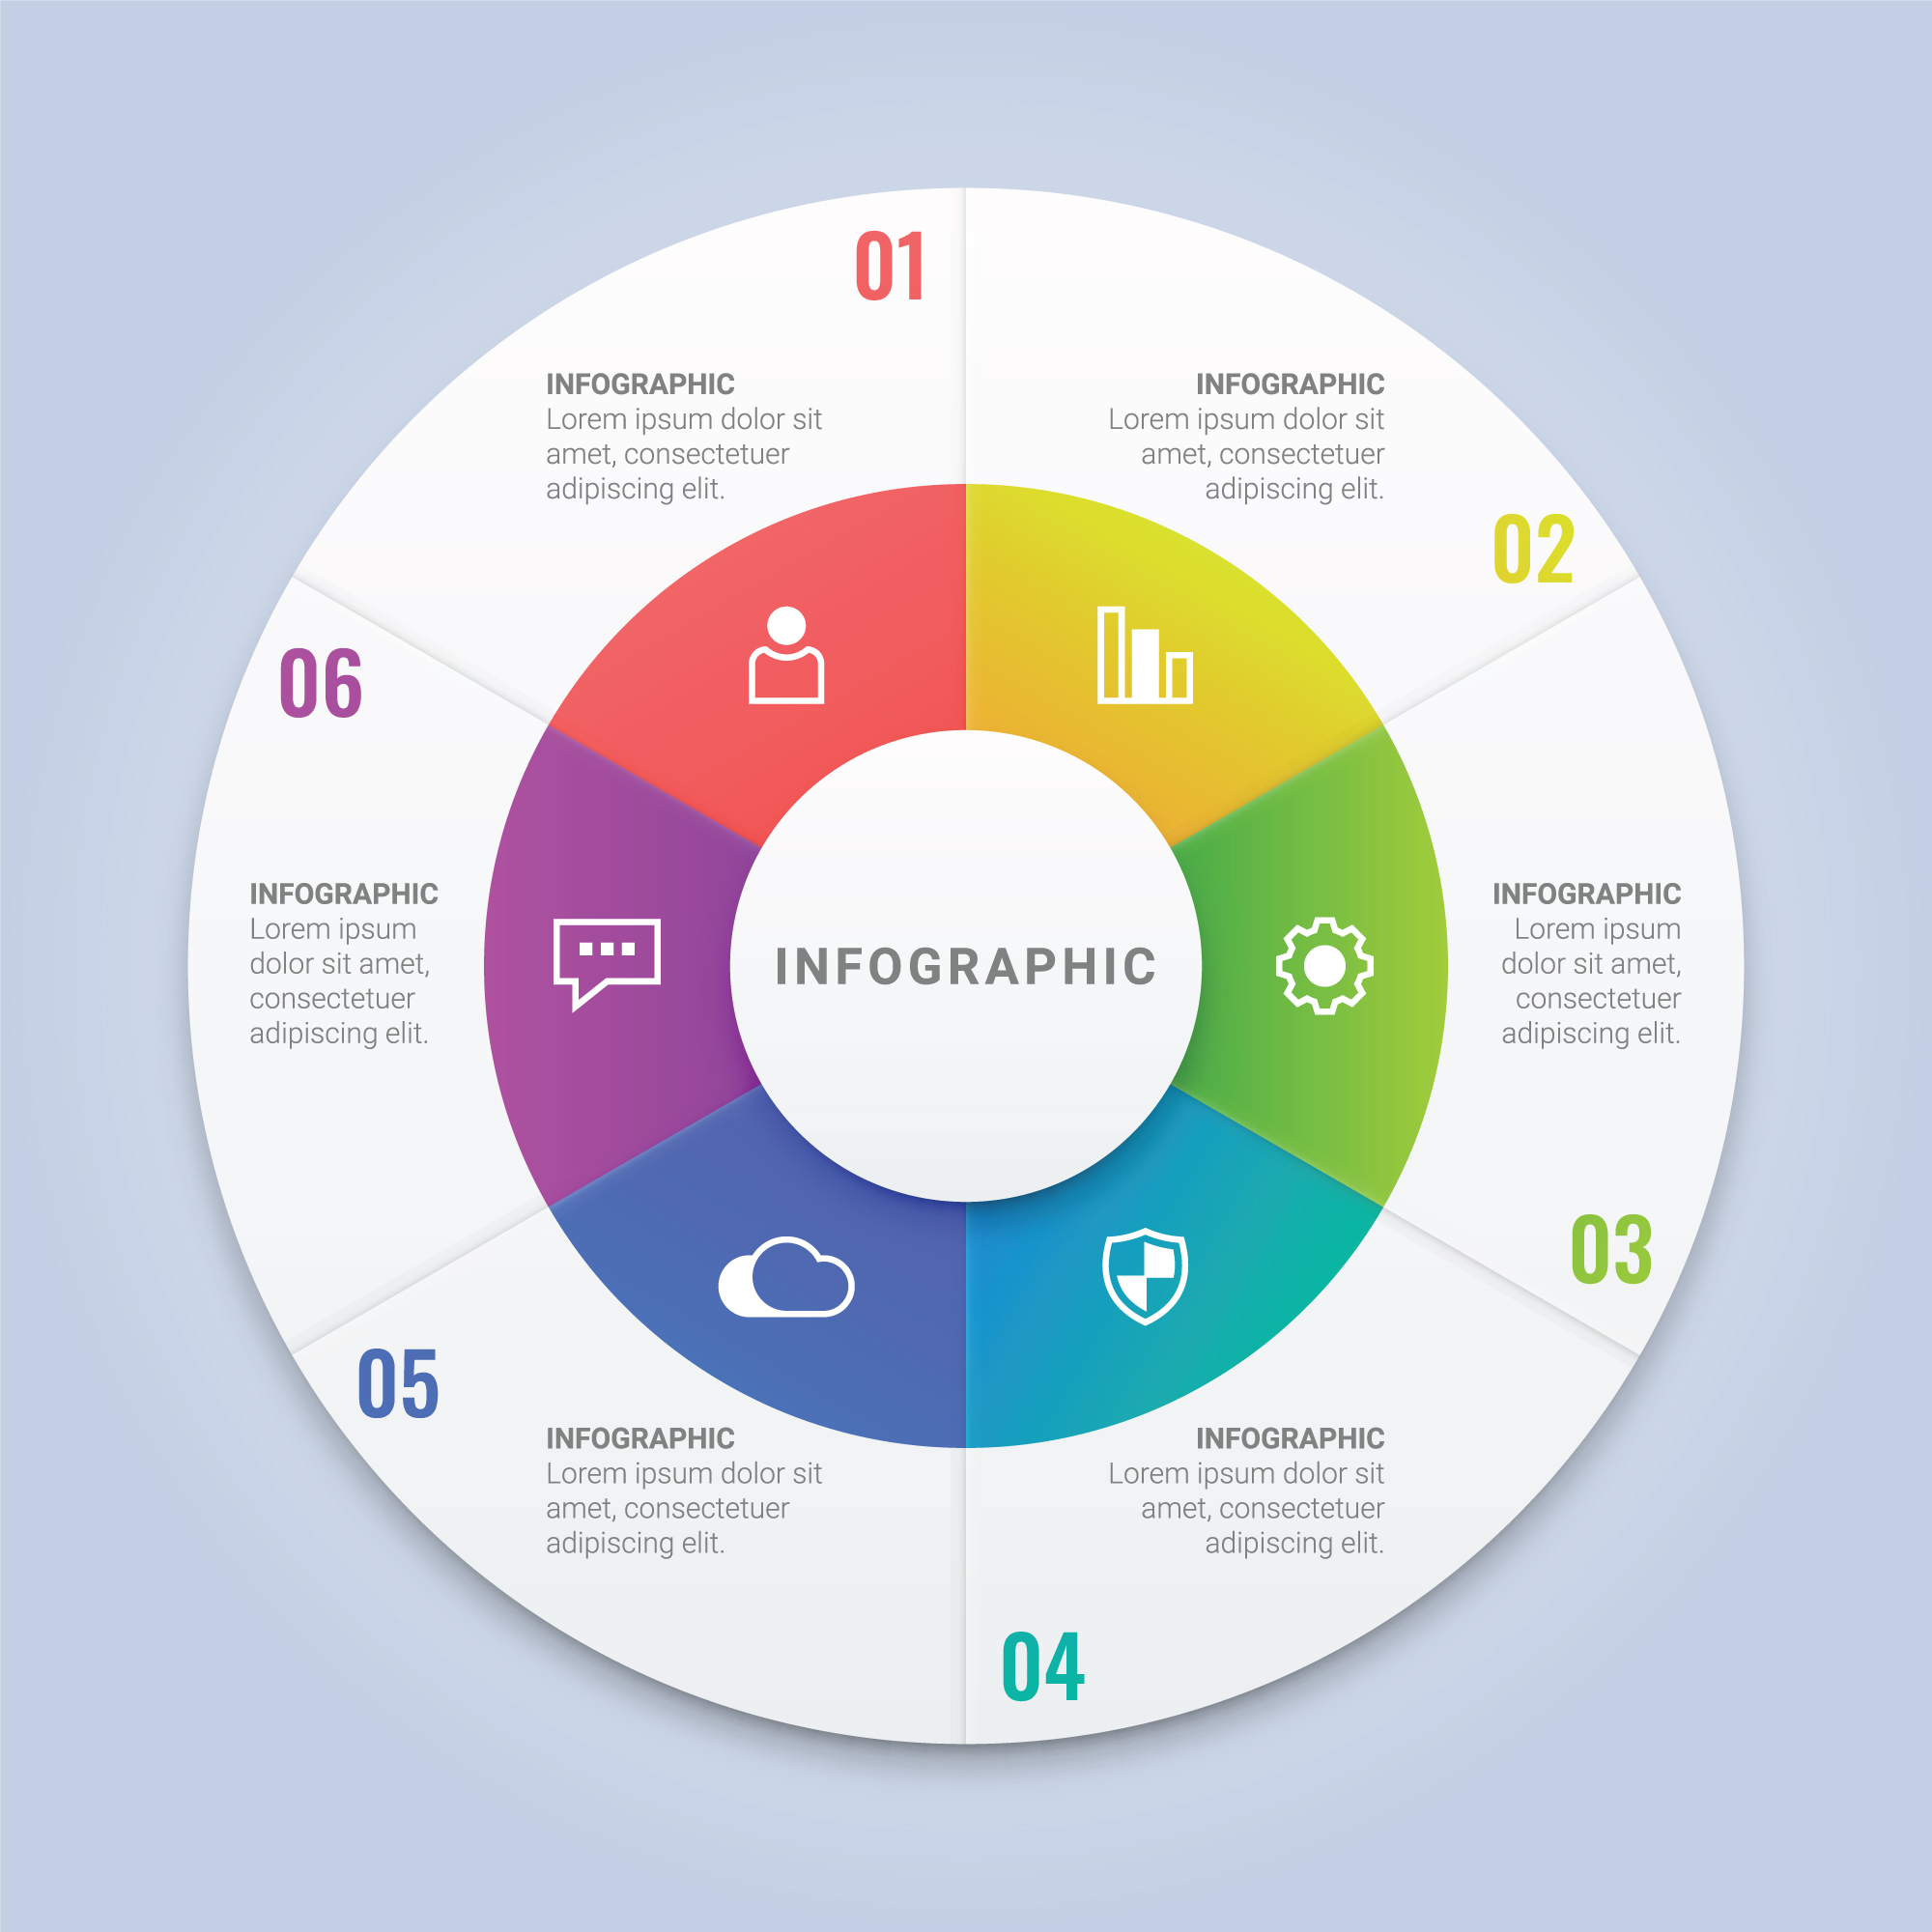 Design circle infographic 8 options, Business concept infographic template can be used for ...